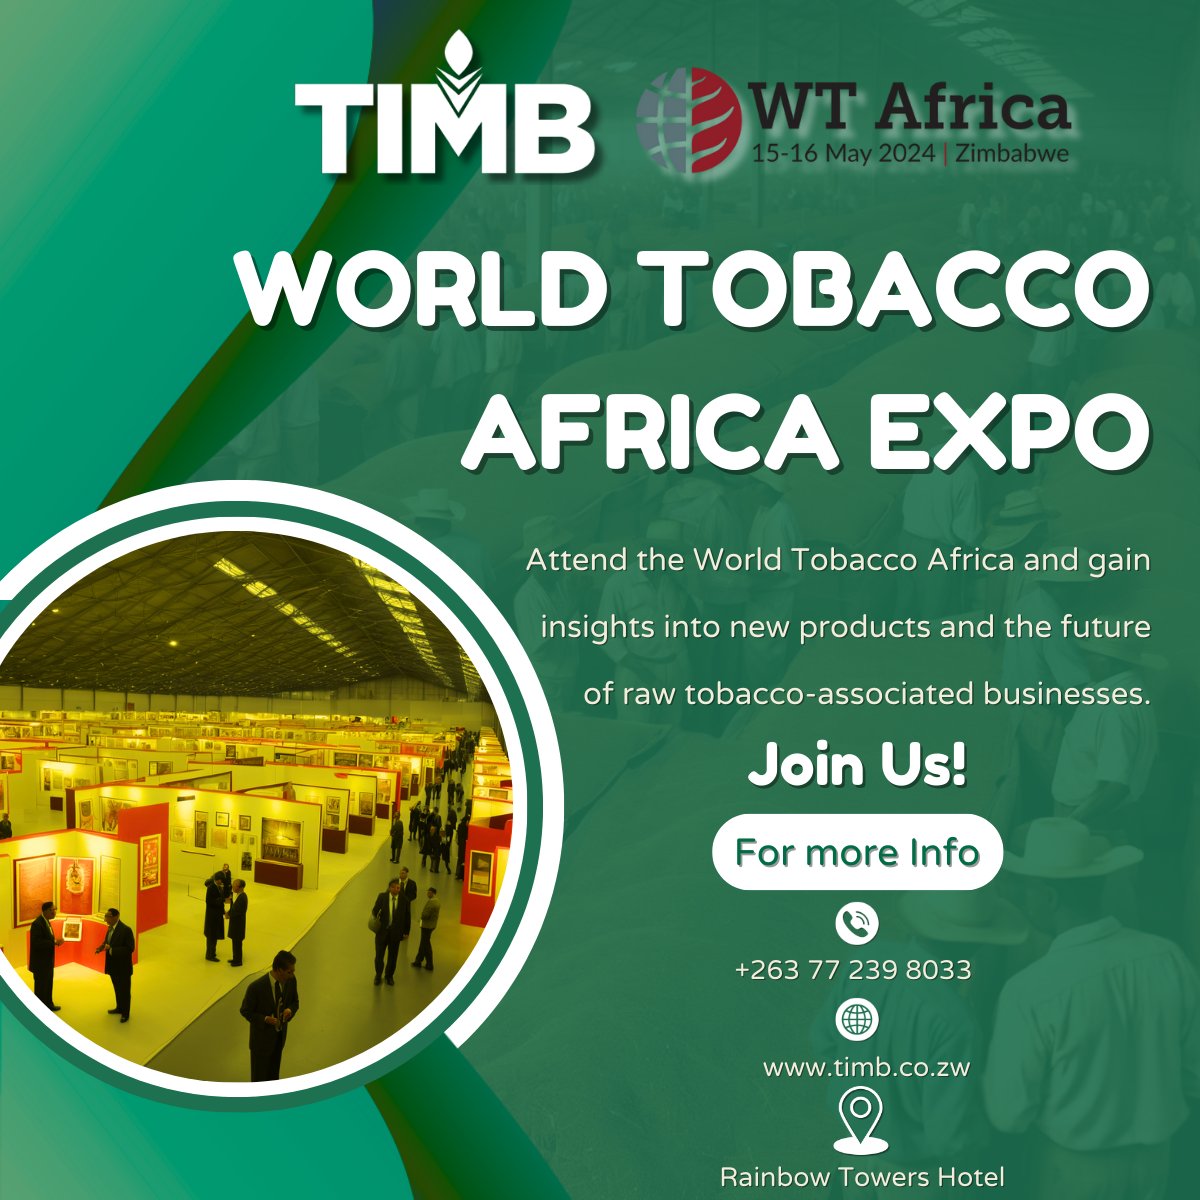 Engage in the future of tobacco farming at World Tobacco Africa. Join us at Rainbow Towers Hotel in Harare, 15-16 May 2024!! #wtafrica24 #Zimbabwe #harare #forlivelihoods #forsustainability #dubai #tobaccoindustry #networking #worldtobacco